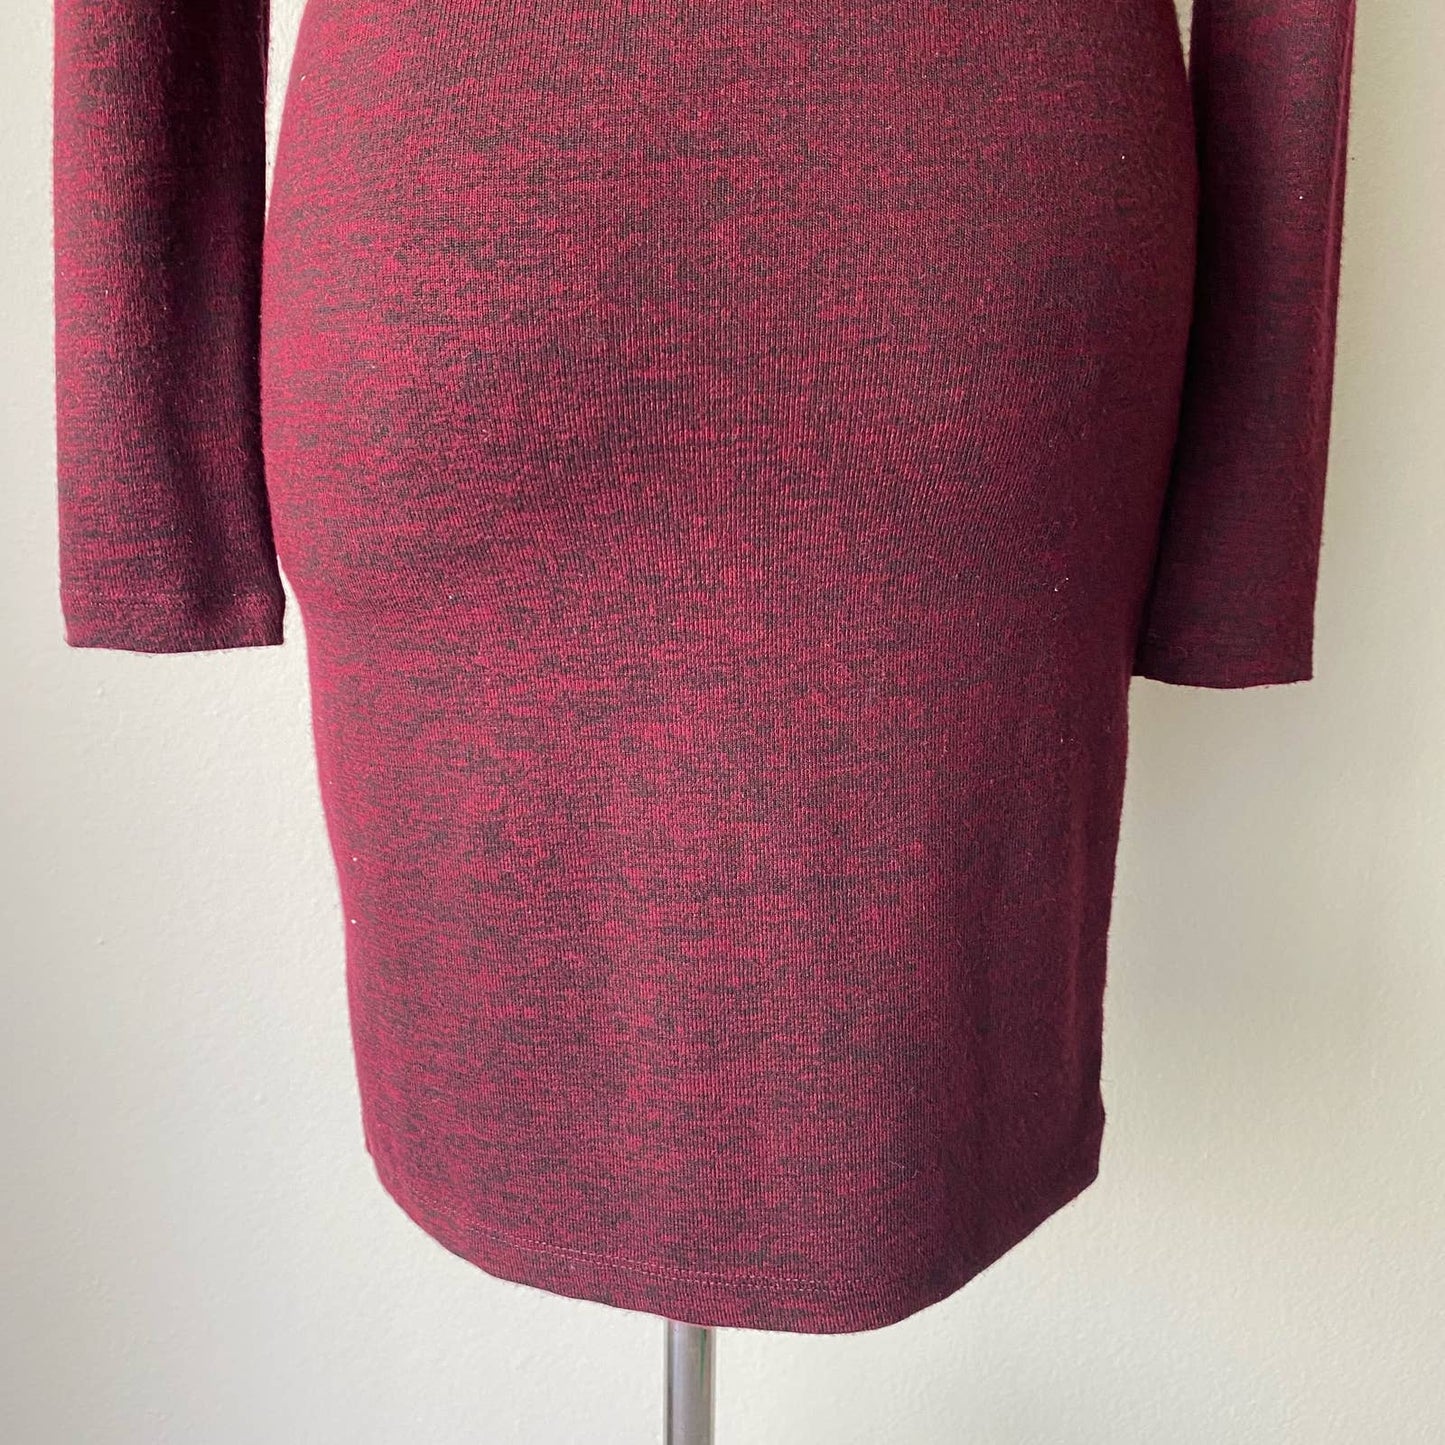 French Connection sz S turtleneck stretch long sleeve mini dress